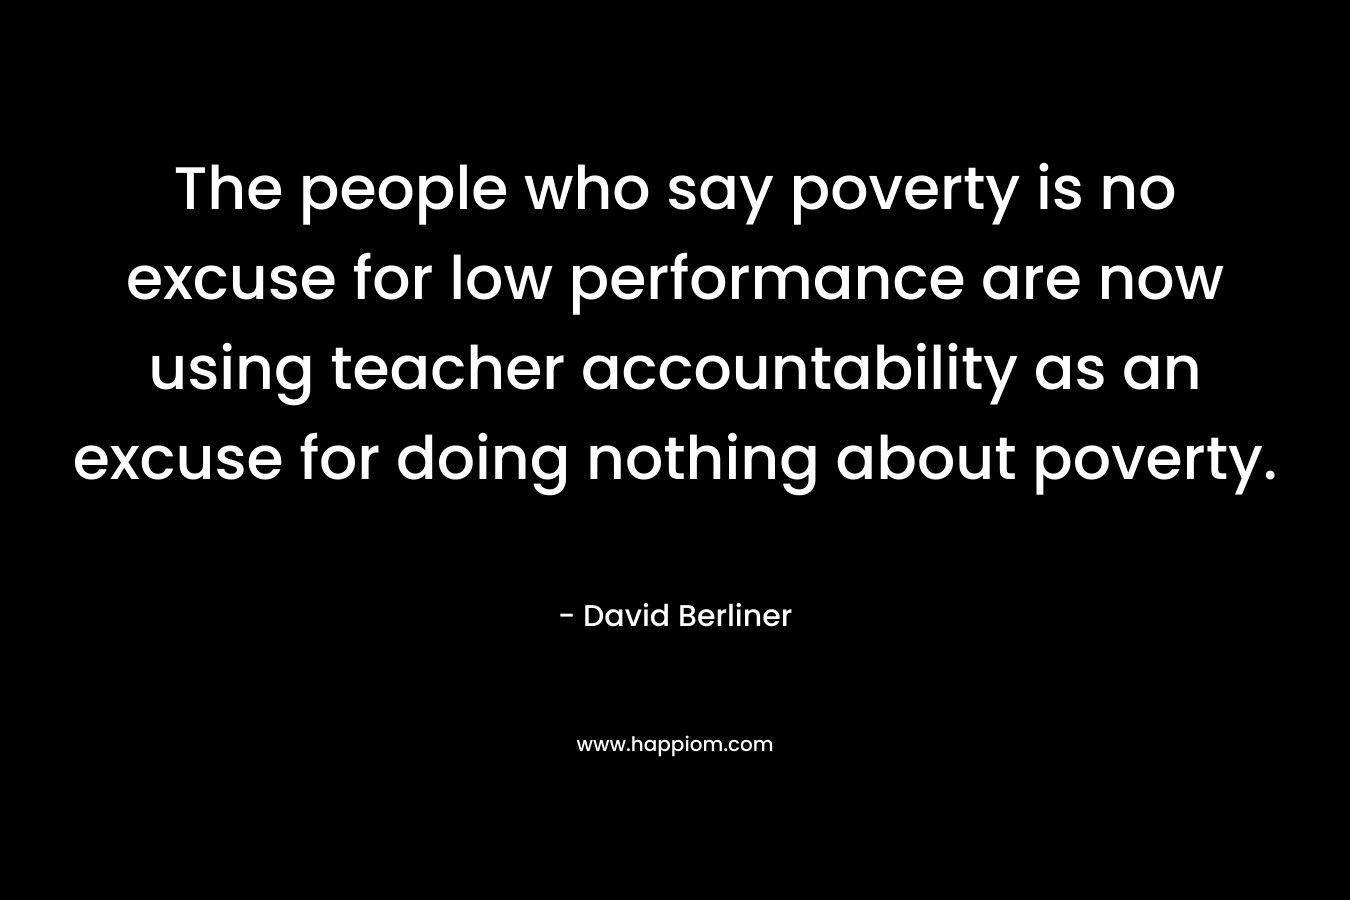 The people who say poverty is no excuse for low performance are now using teacher accountability as an excuse for doing nothing about poverty. – David Berliner